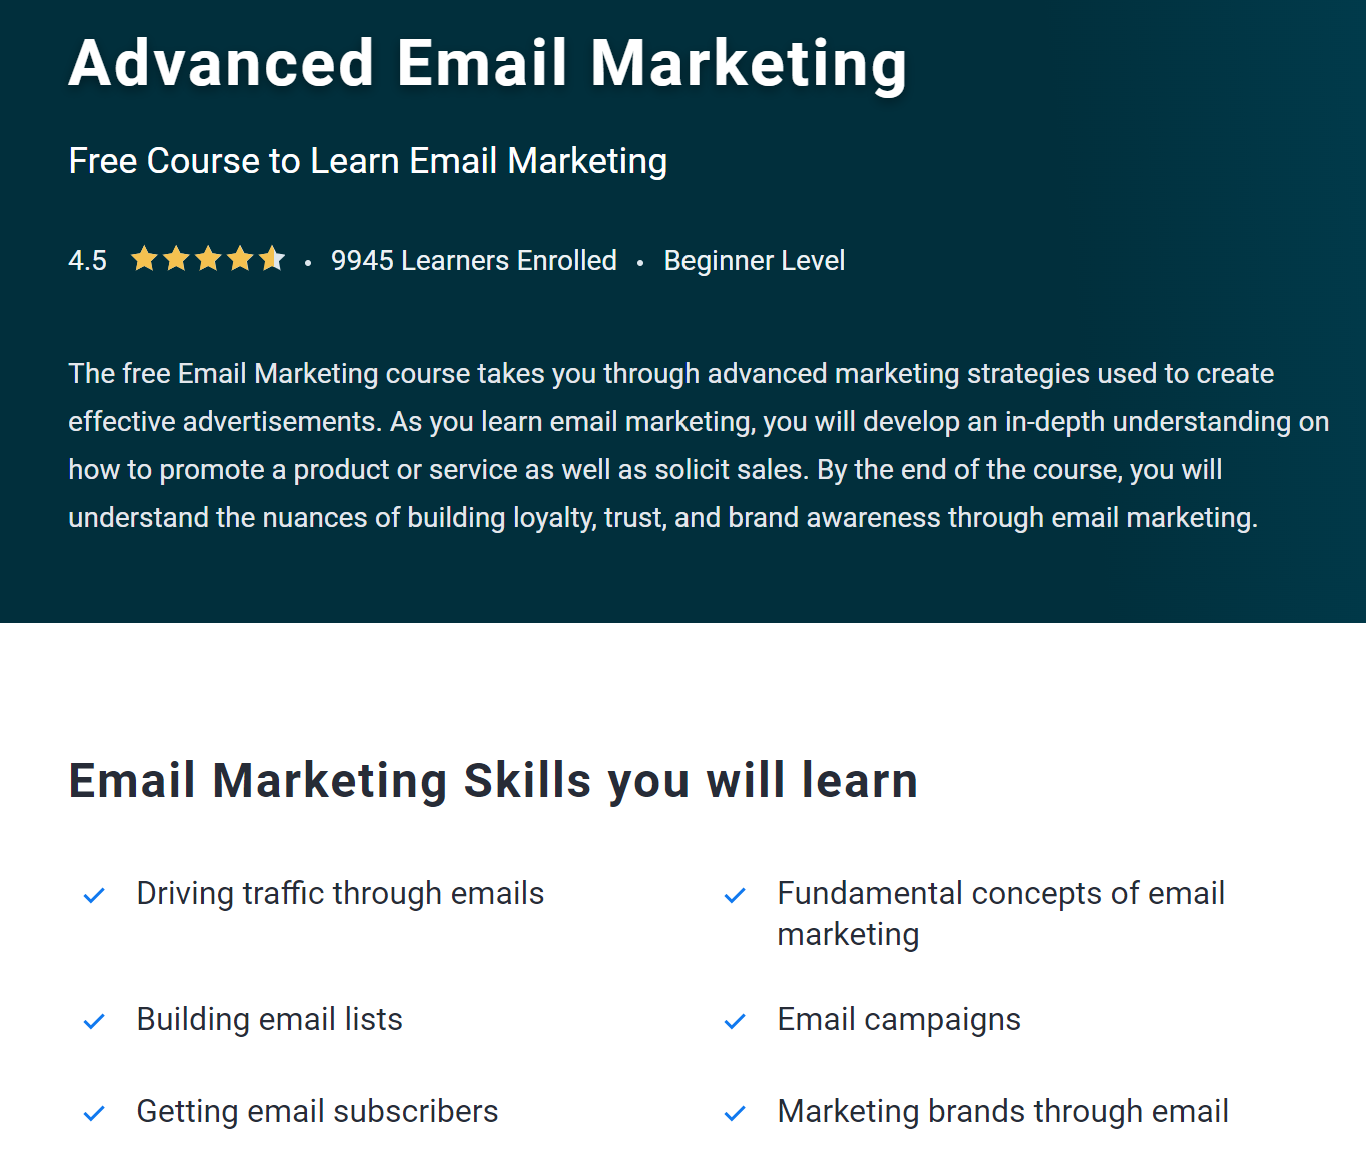 Advanced email marketing - one of the best free email marketing courses